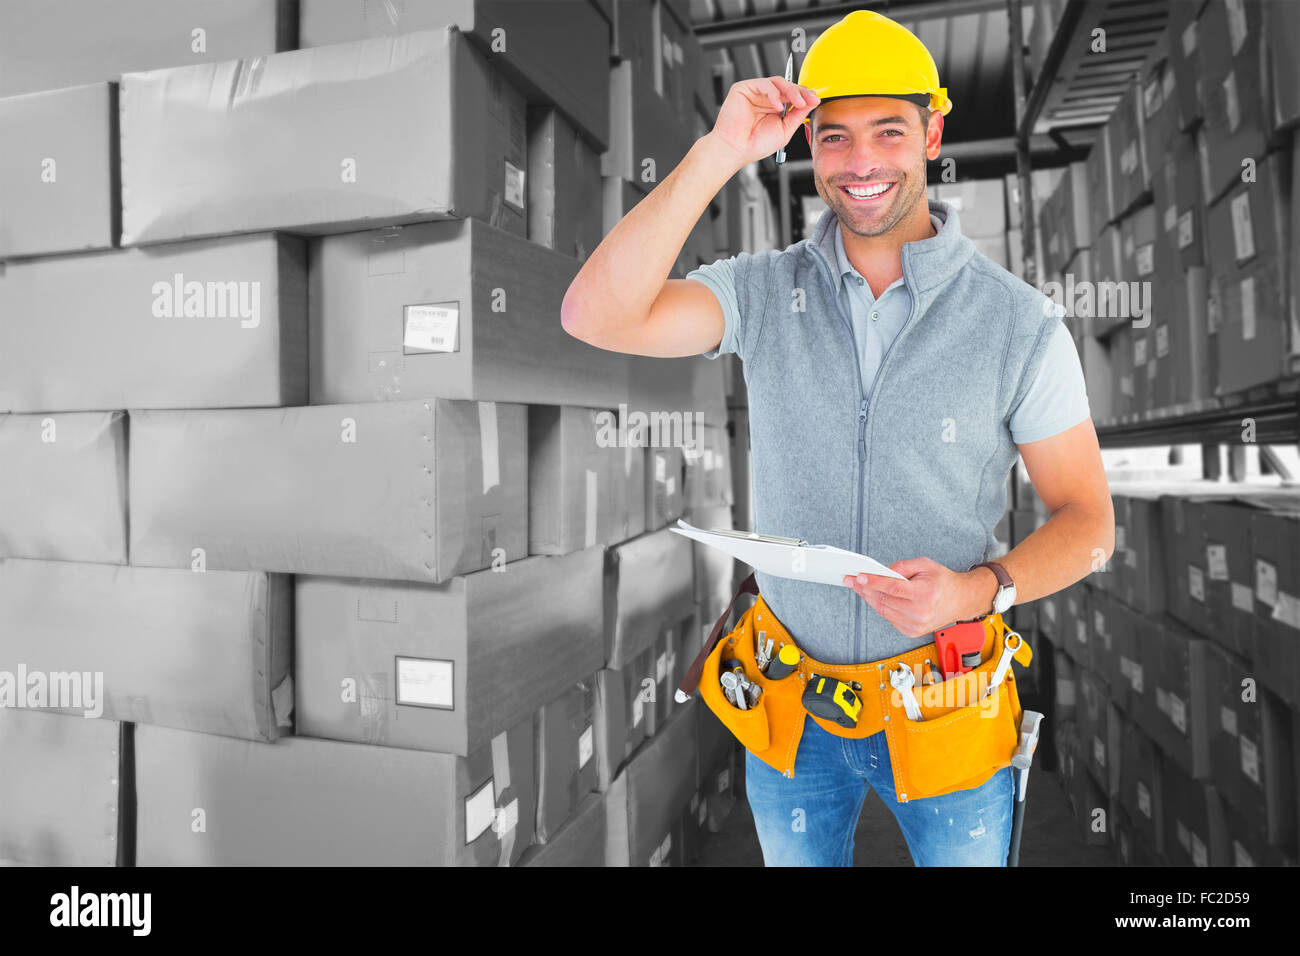 Composite image of portrait of smiling manual worker holding clipboard Stock Photo